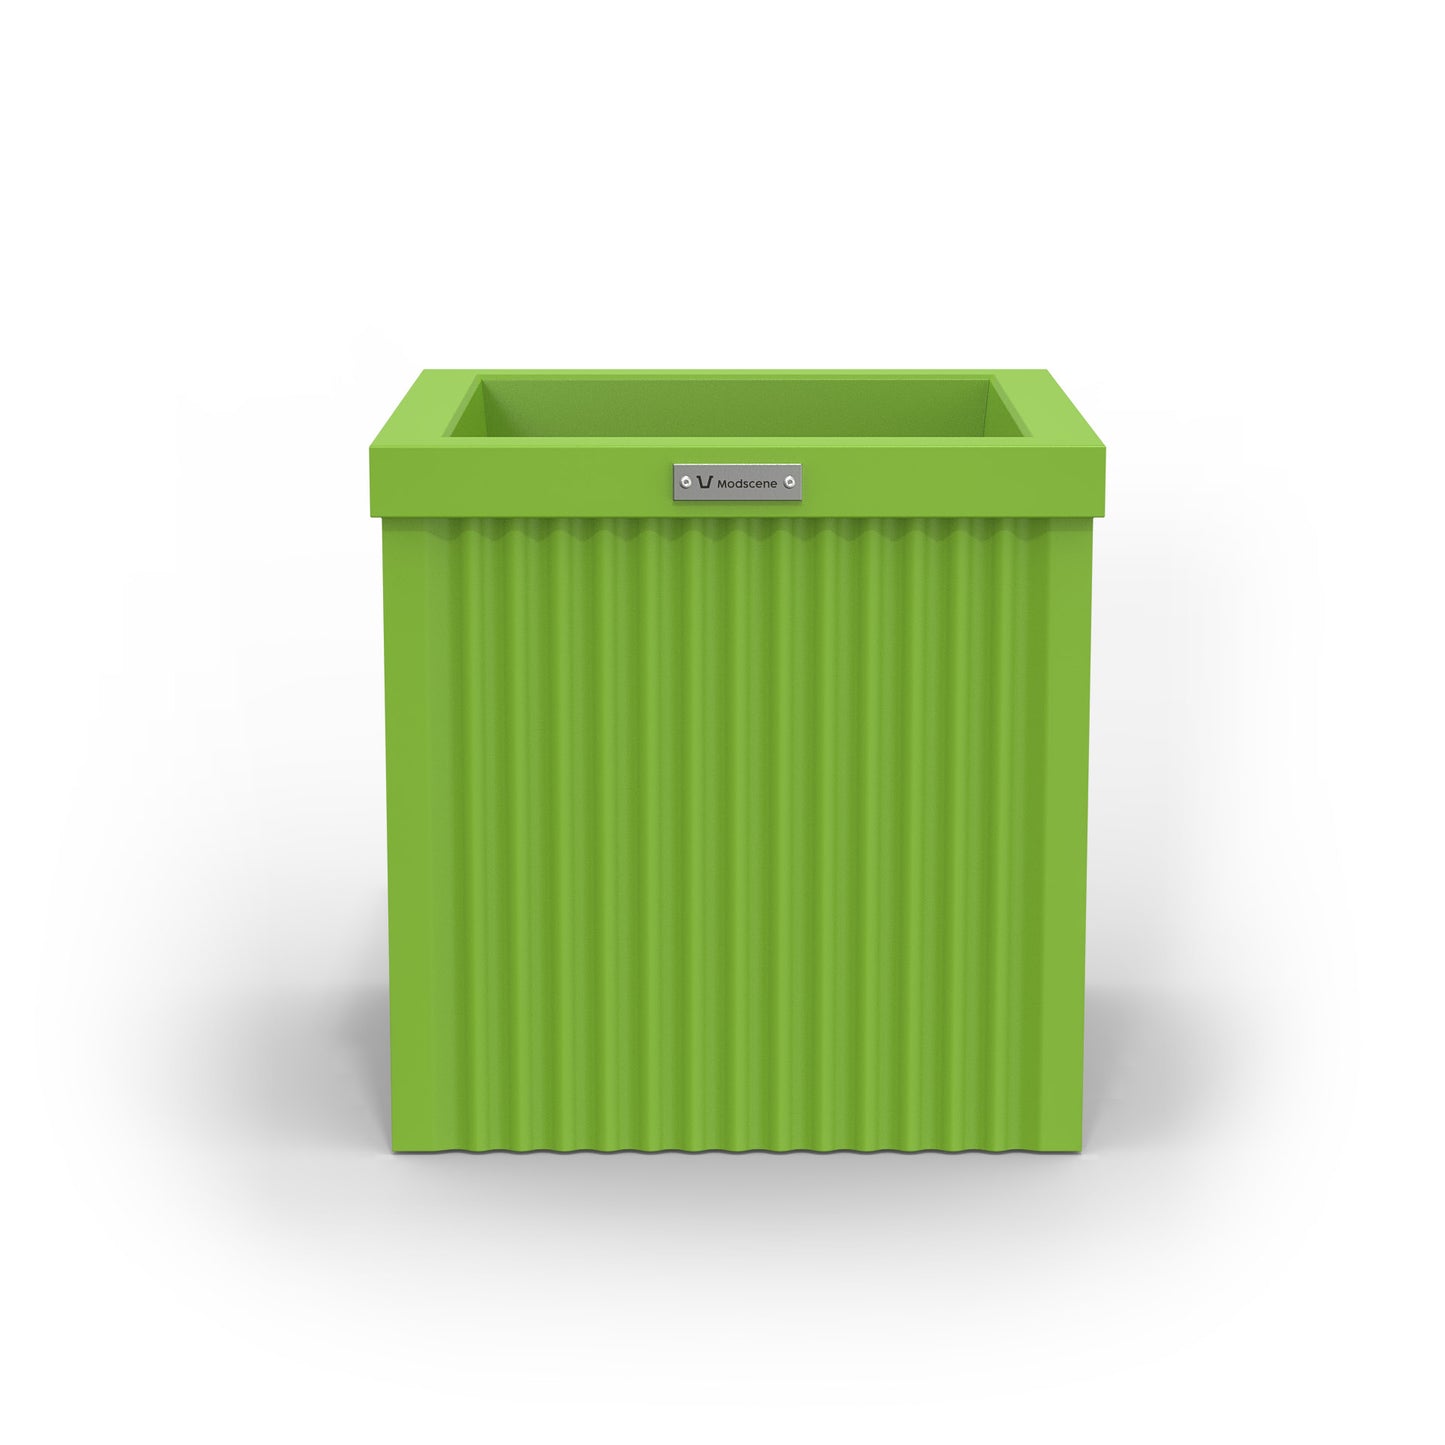 A corrugated square planter pot. The pot planter is lime green in colour.